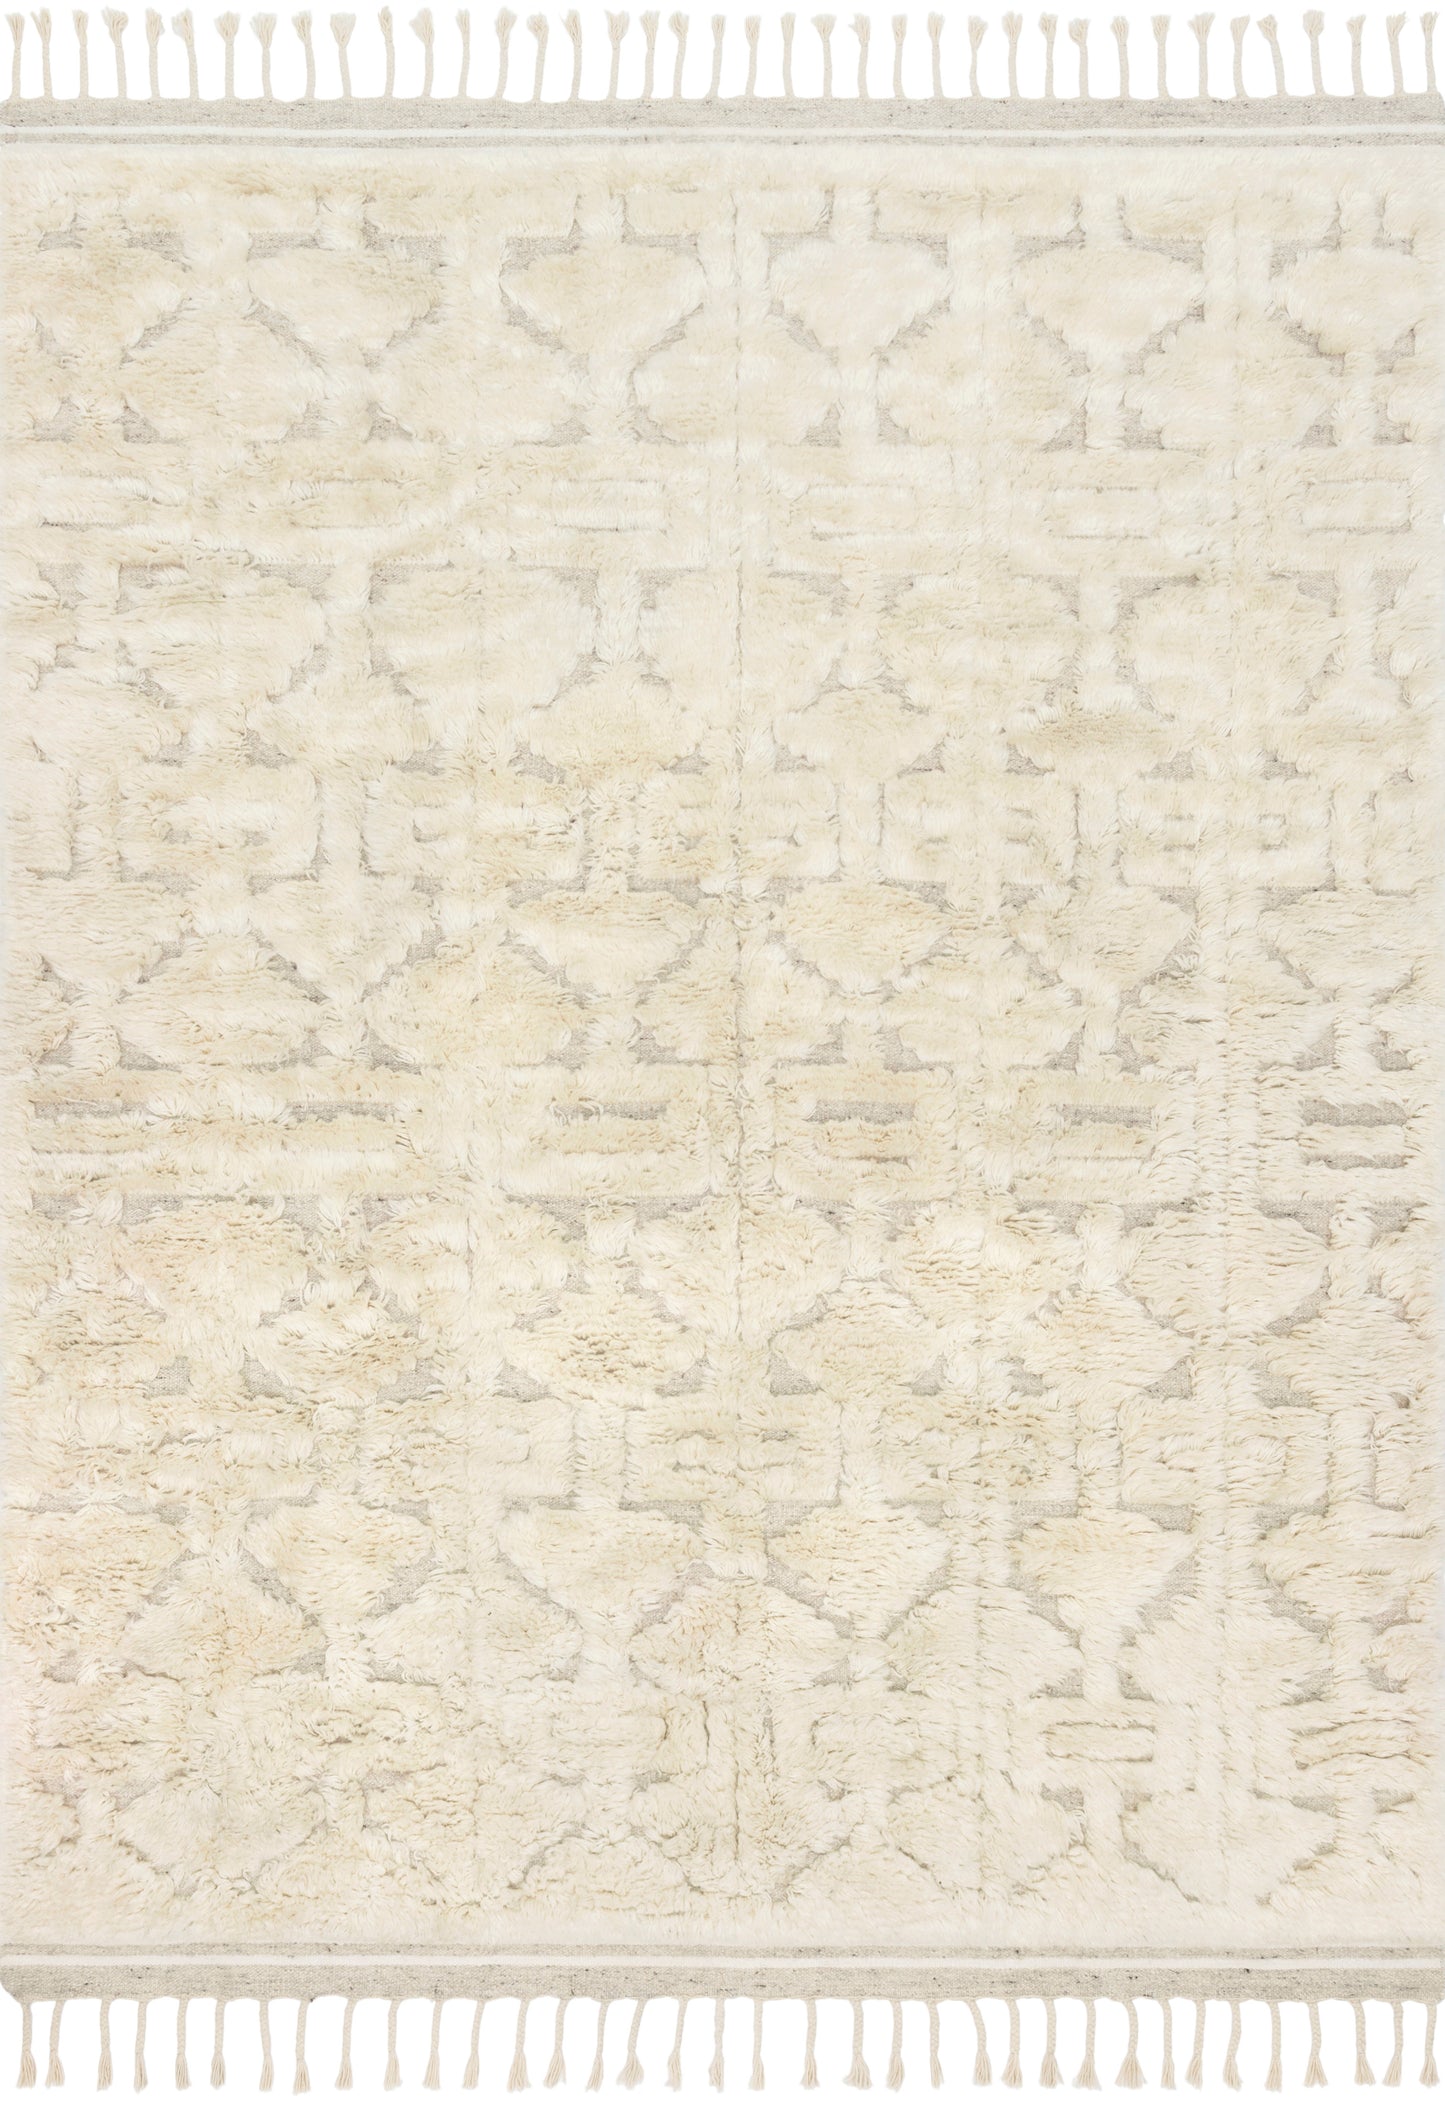 A picture of Loloi's Hygge rug, in style YG-03, color Oatmeal / Ivory